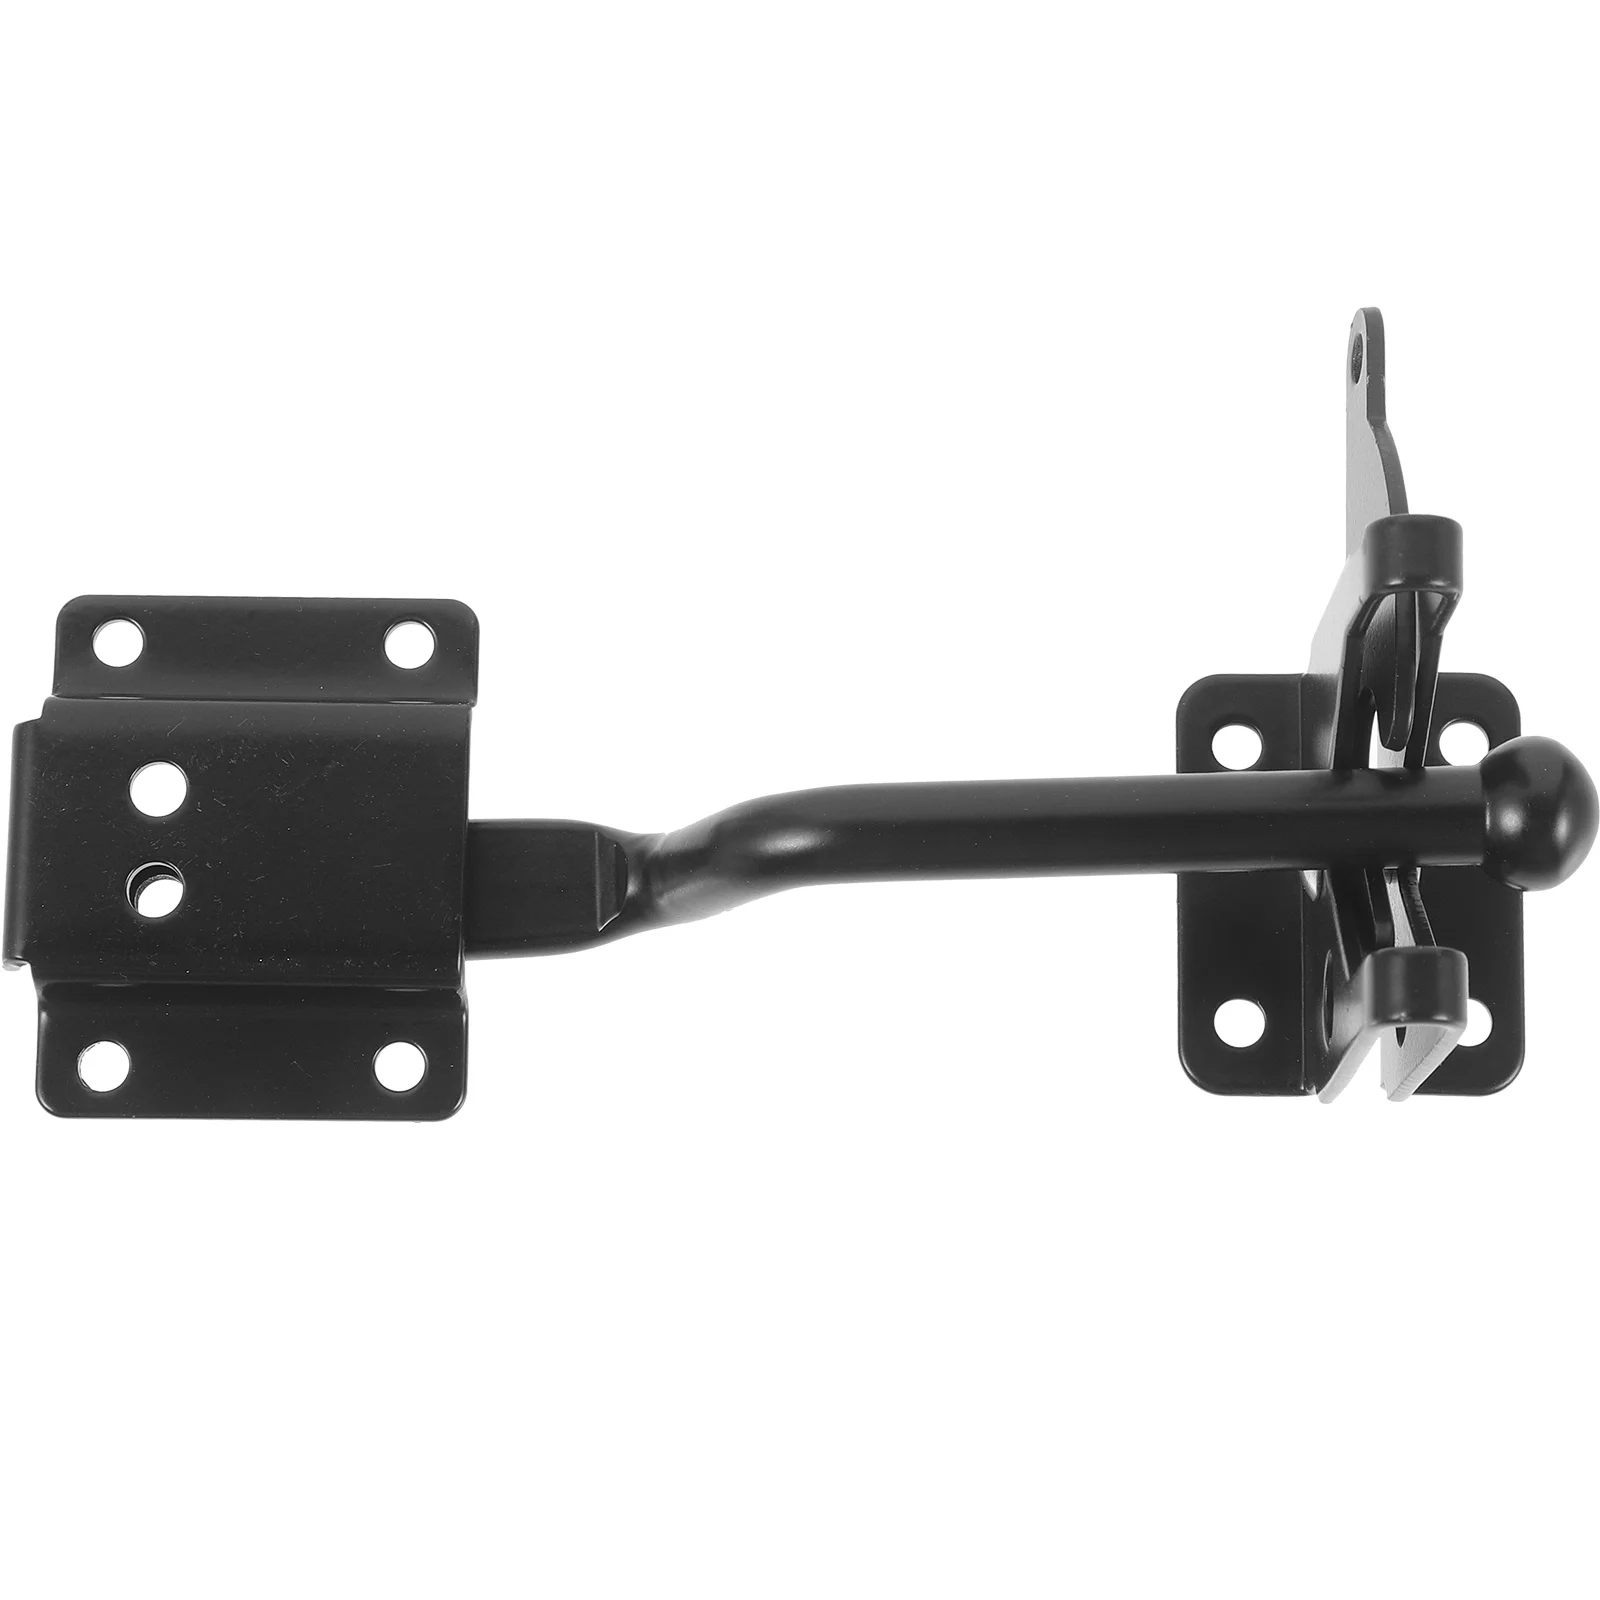 

Gate Latch Pull Locking Cable Fence Locks Outdoor Gates Latches Wooden Handles Fences Hinges Heavy Duty